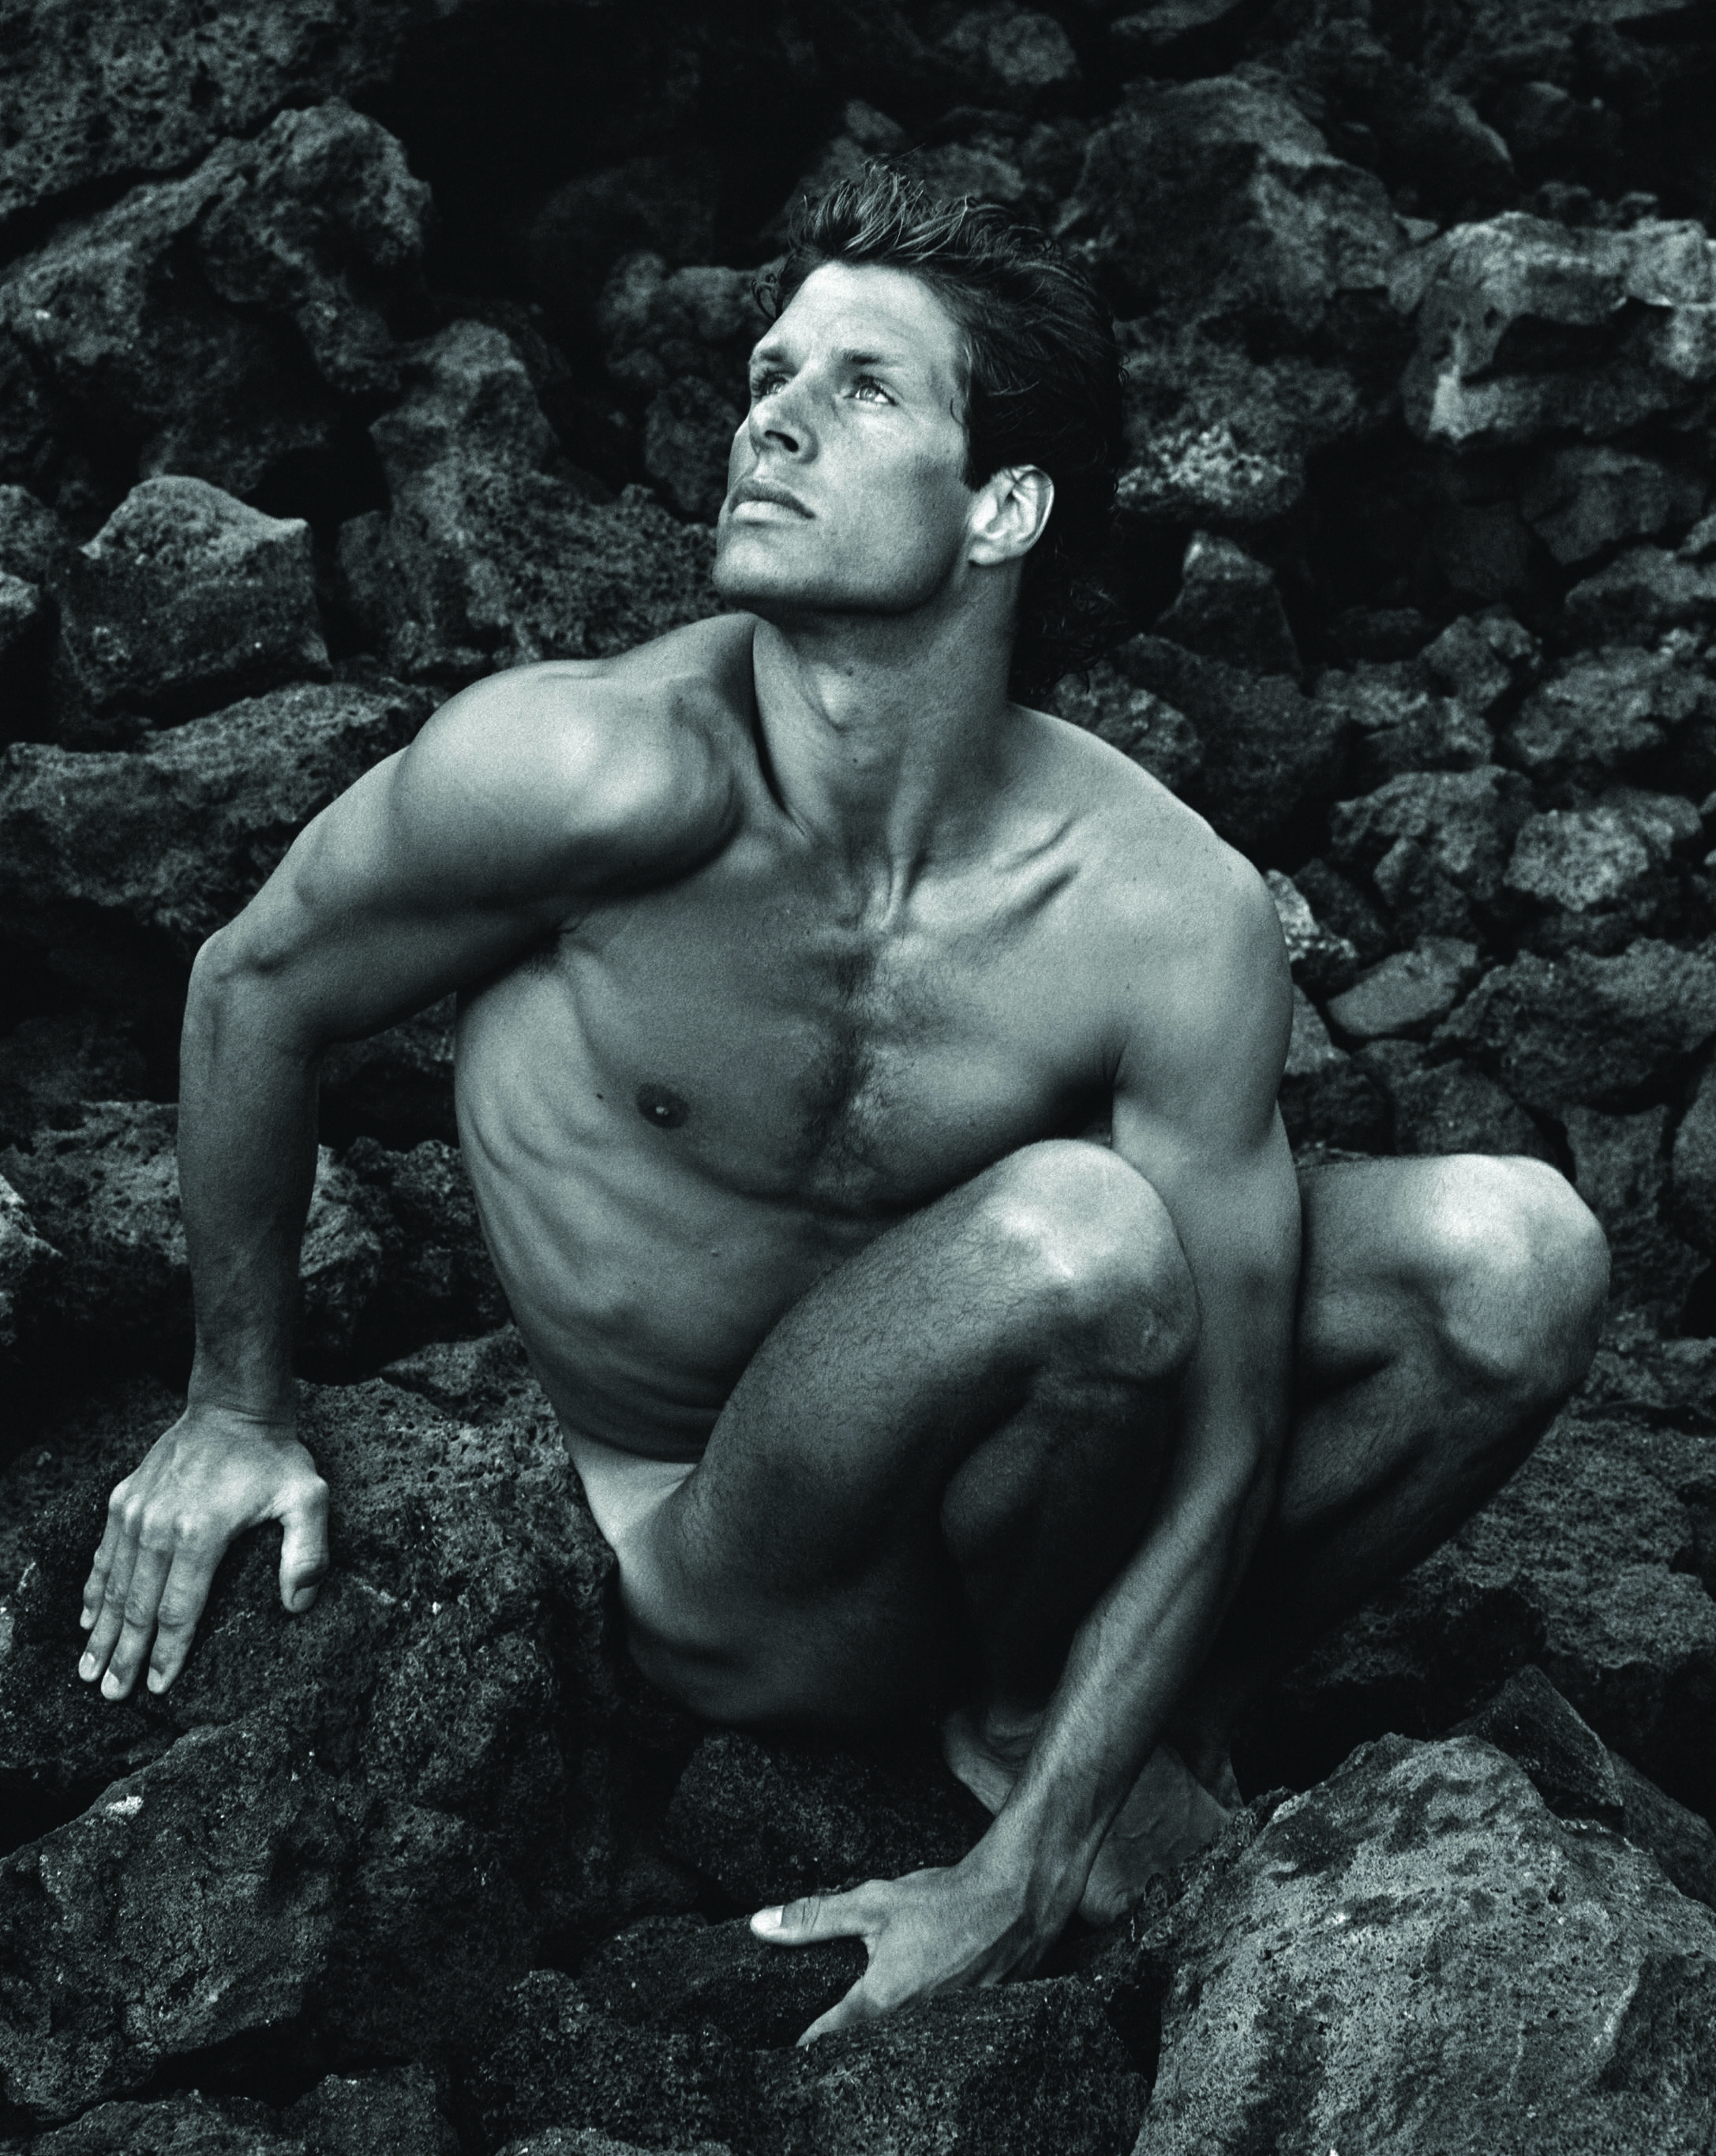 Bruce Weber and the opening up of male beauty | fashion | Agenda